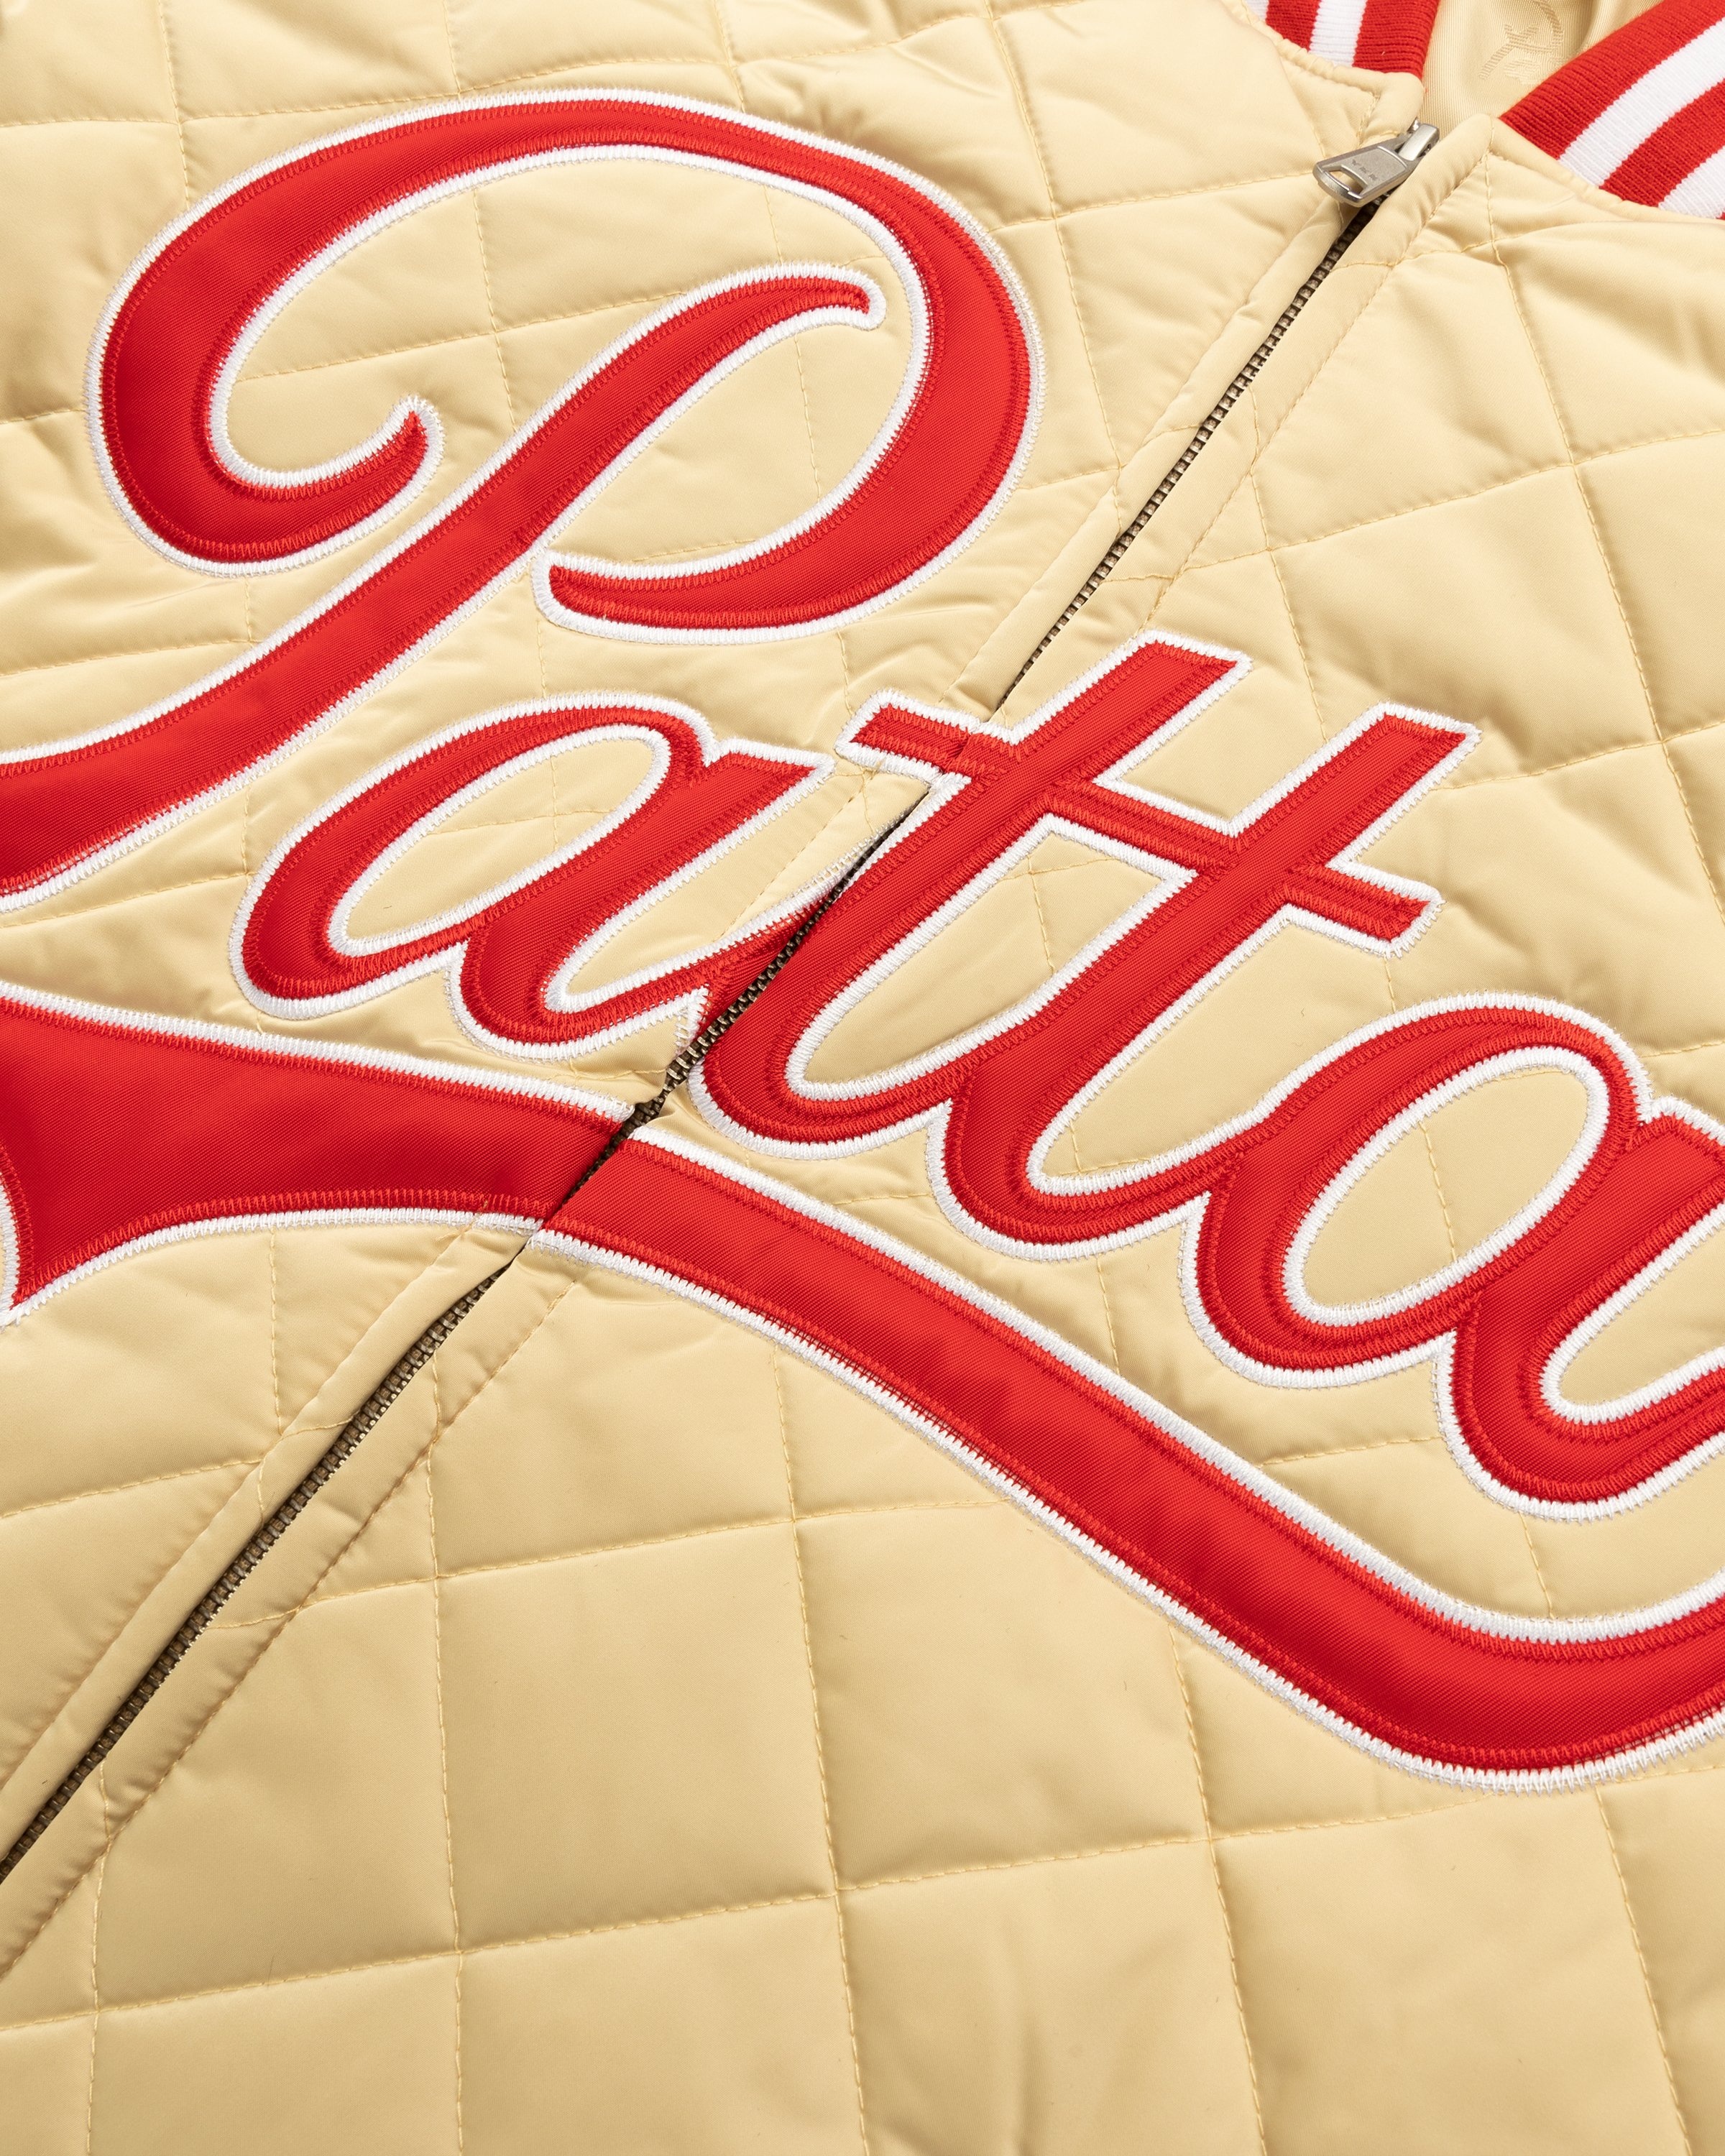 Patta – Diamond Quilted Sports Jacket Mojave Desert - Bomber Jackets - Brown - Image 5